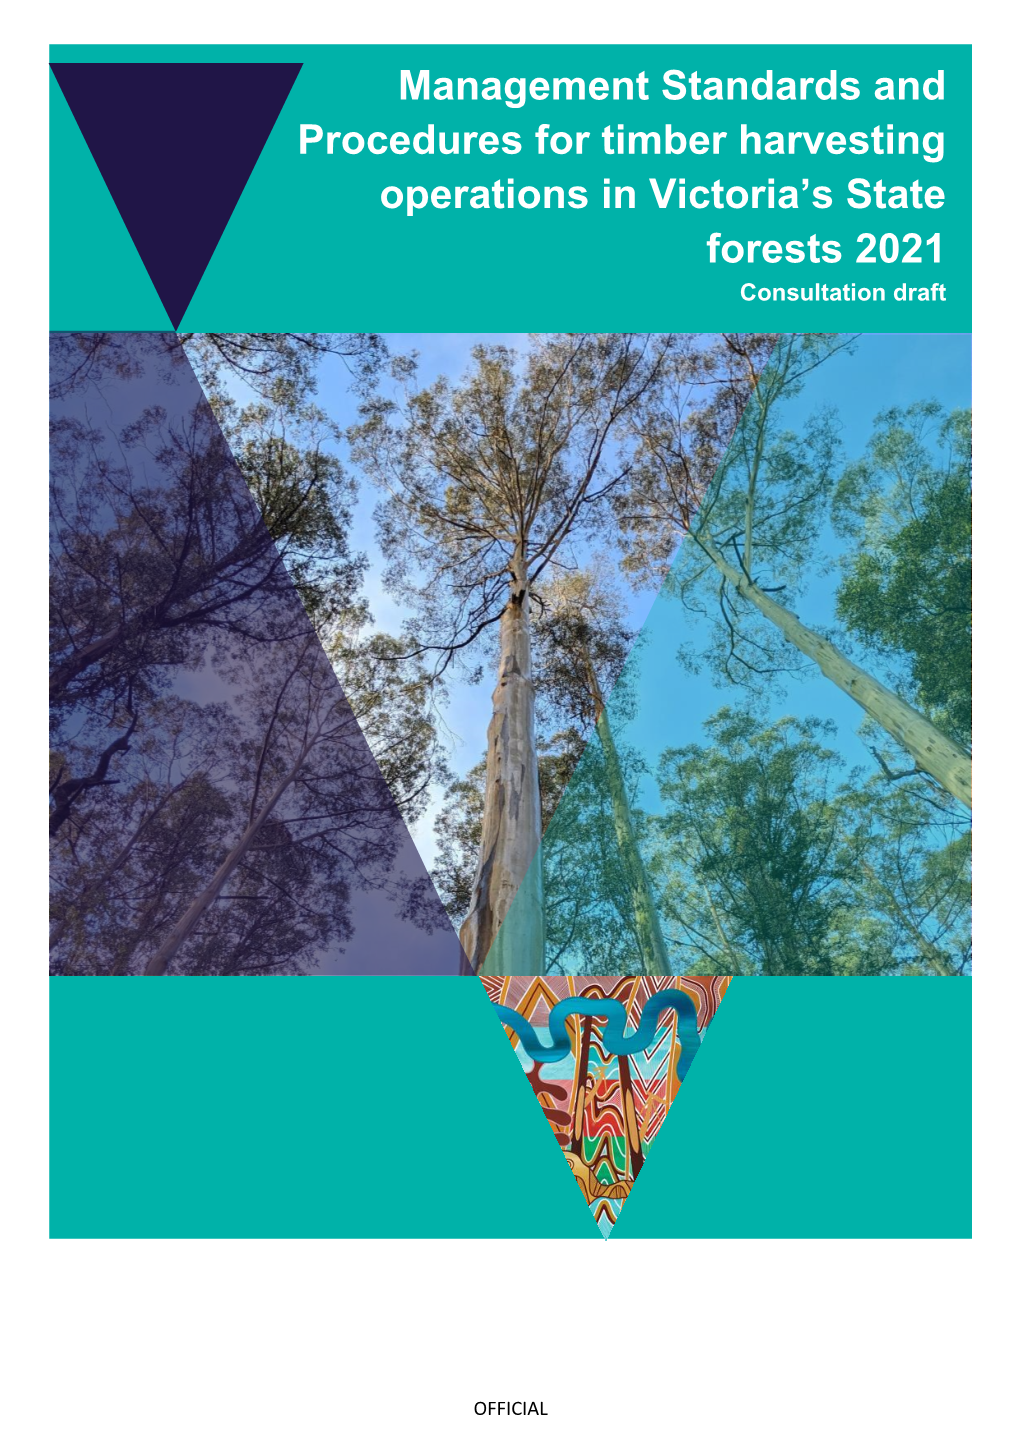 Draft Management Standards and Procedures for Timber Harvesting Operations in Victoria's State Forests 2021